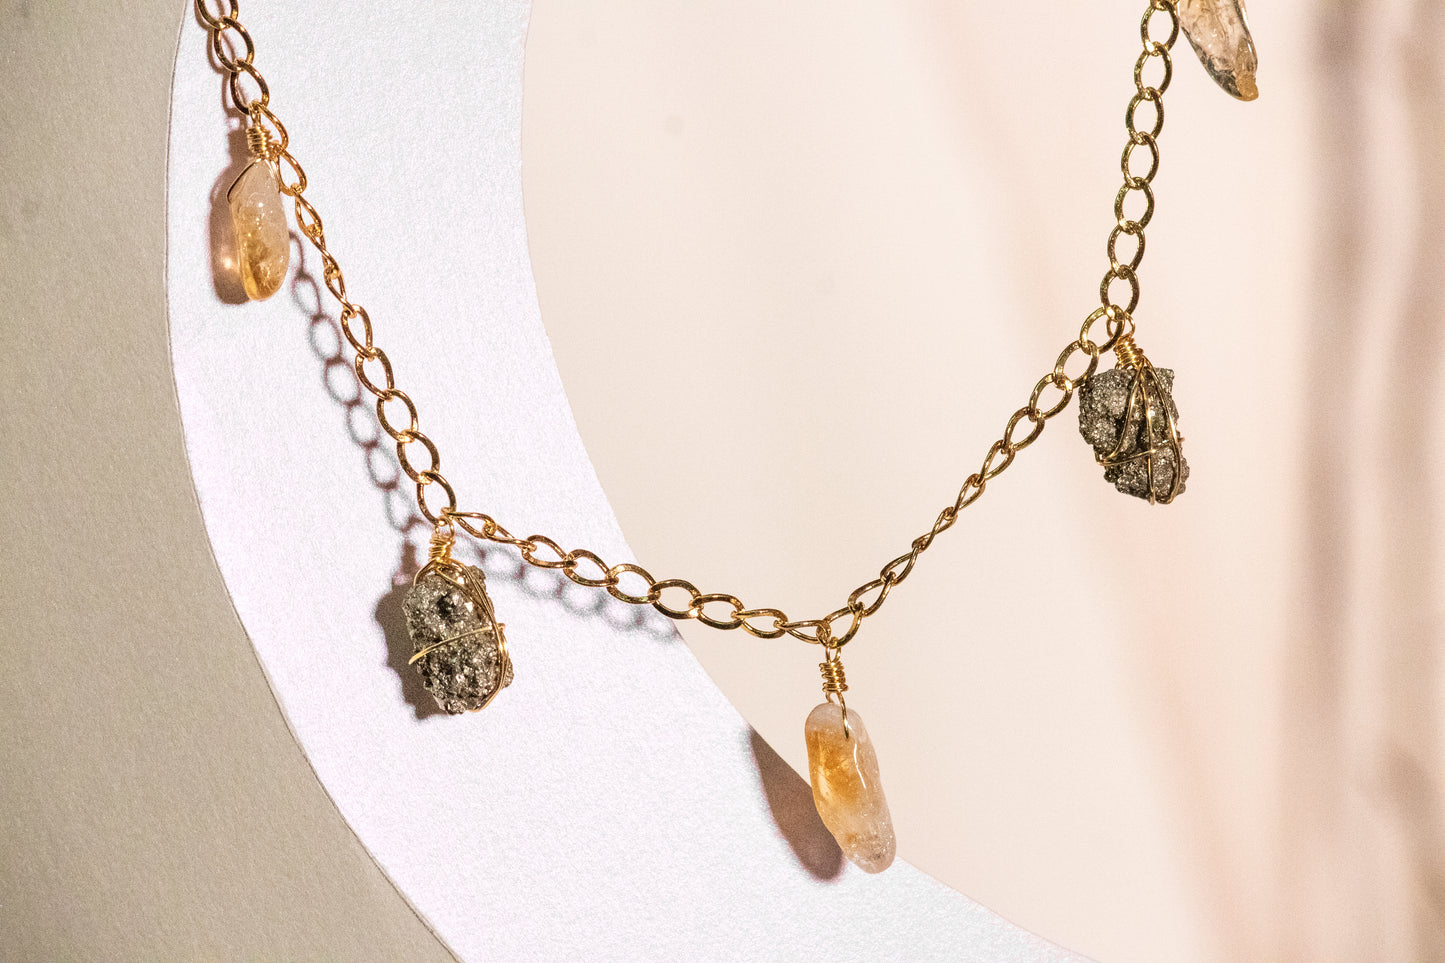 Ayikalil. Necklace with citrine and pyrite